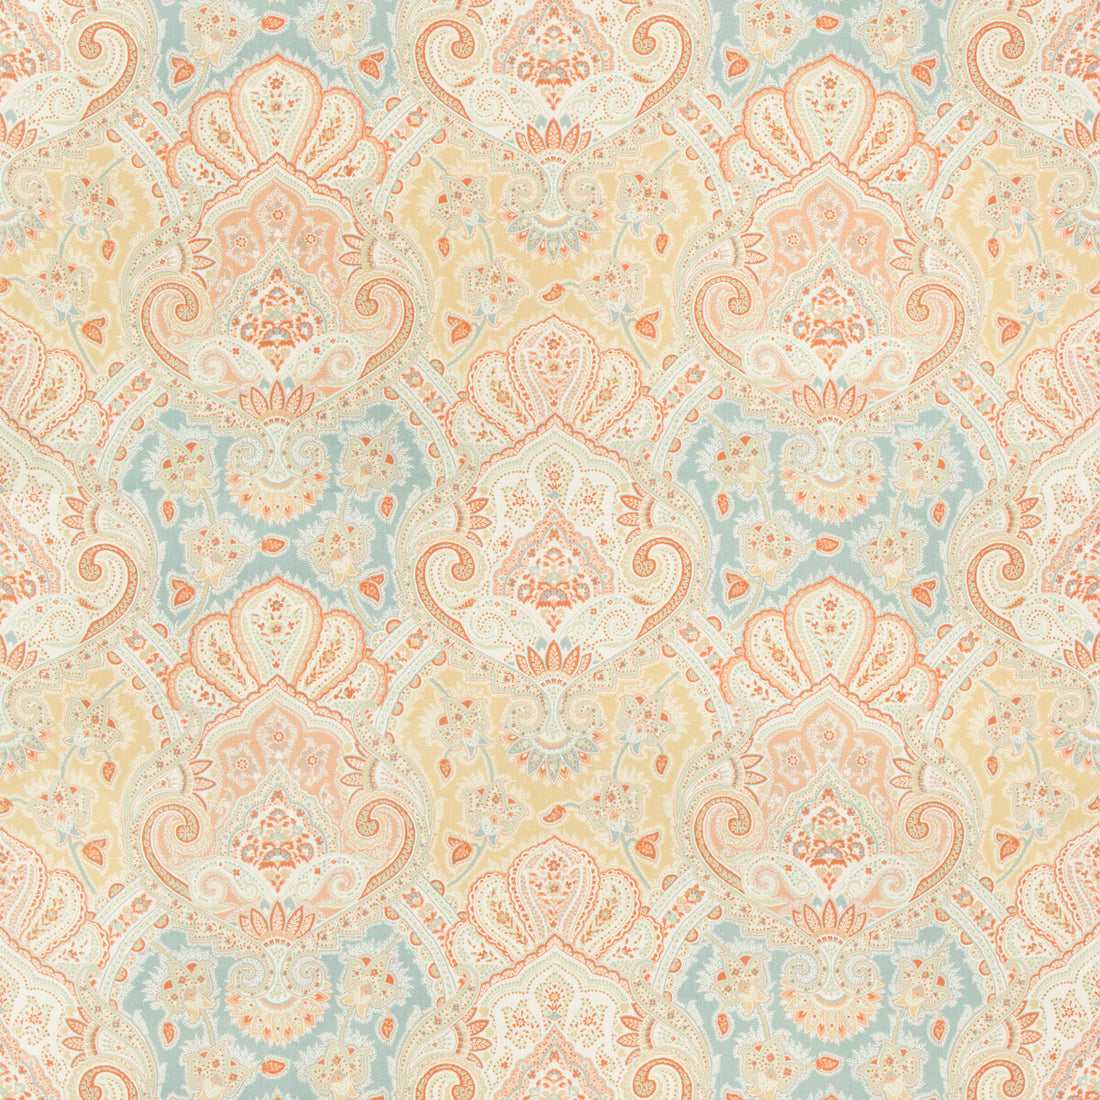 Echocyprus fabric in apricot color - pattern ECHOCYPRUS.12.0 - by Kravet Basics in the Echo Greenwich collection